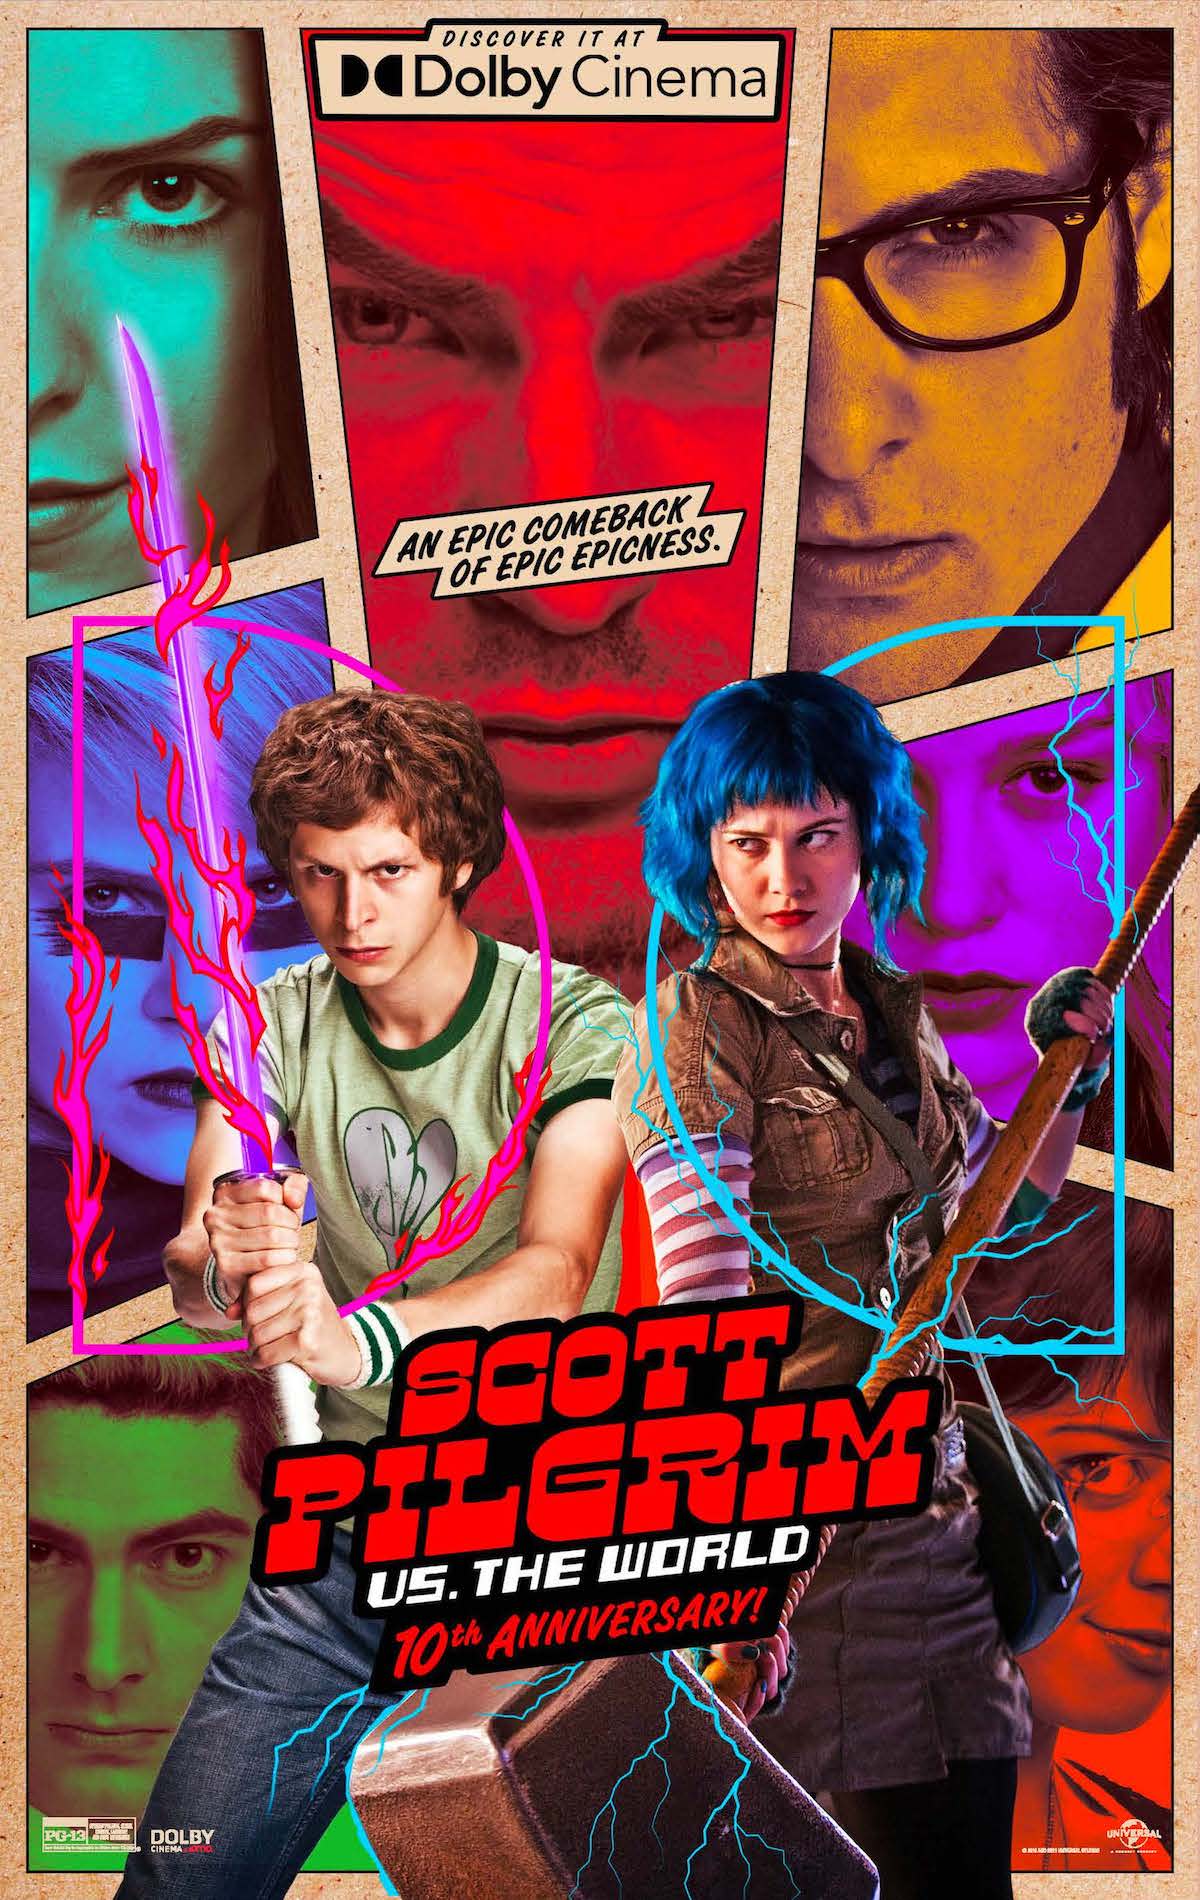 scott-pilgrim-coming-to-theaters-with-new-enhanced-version